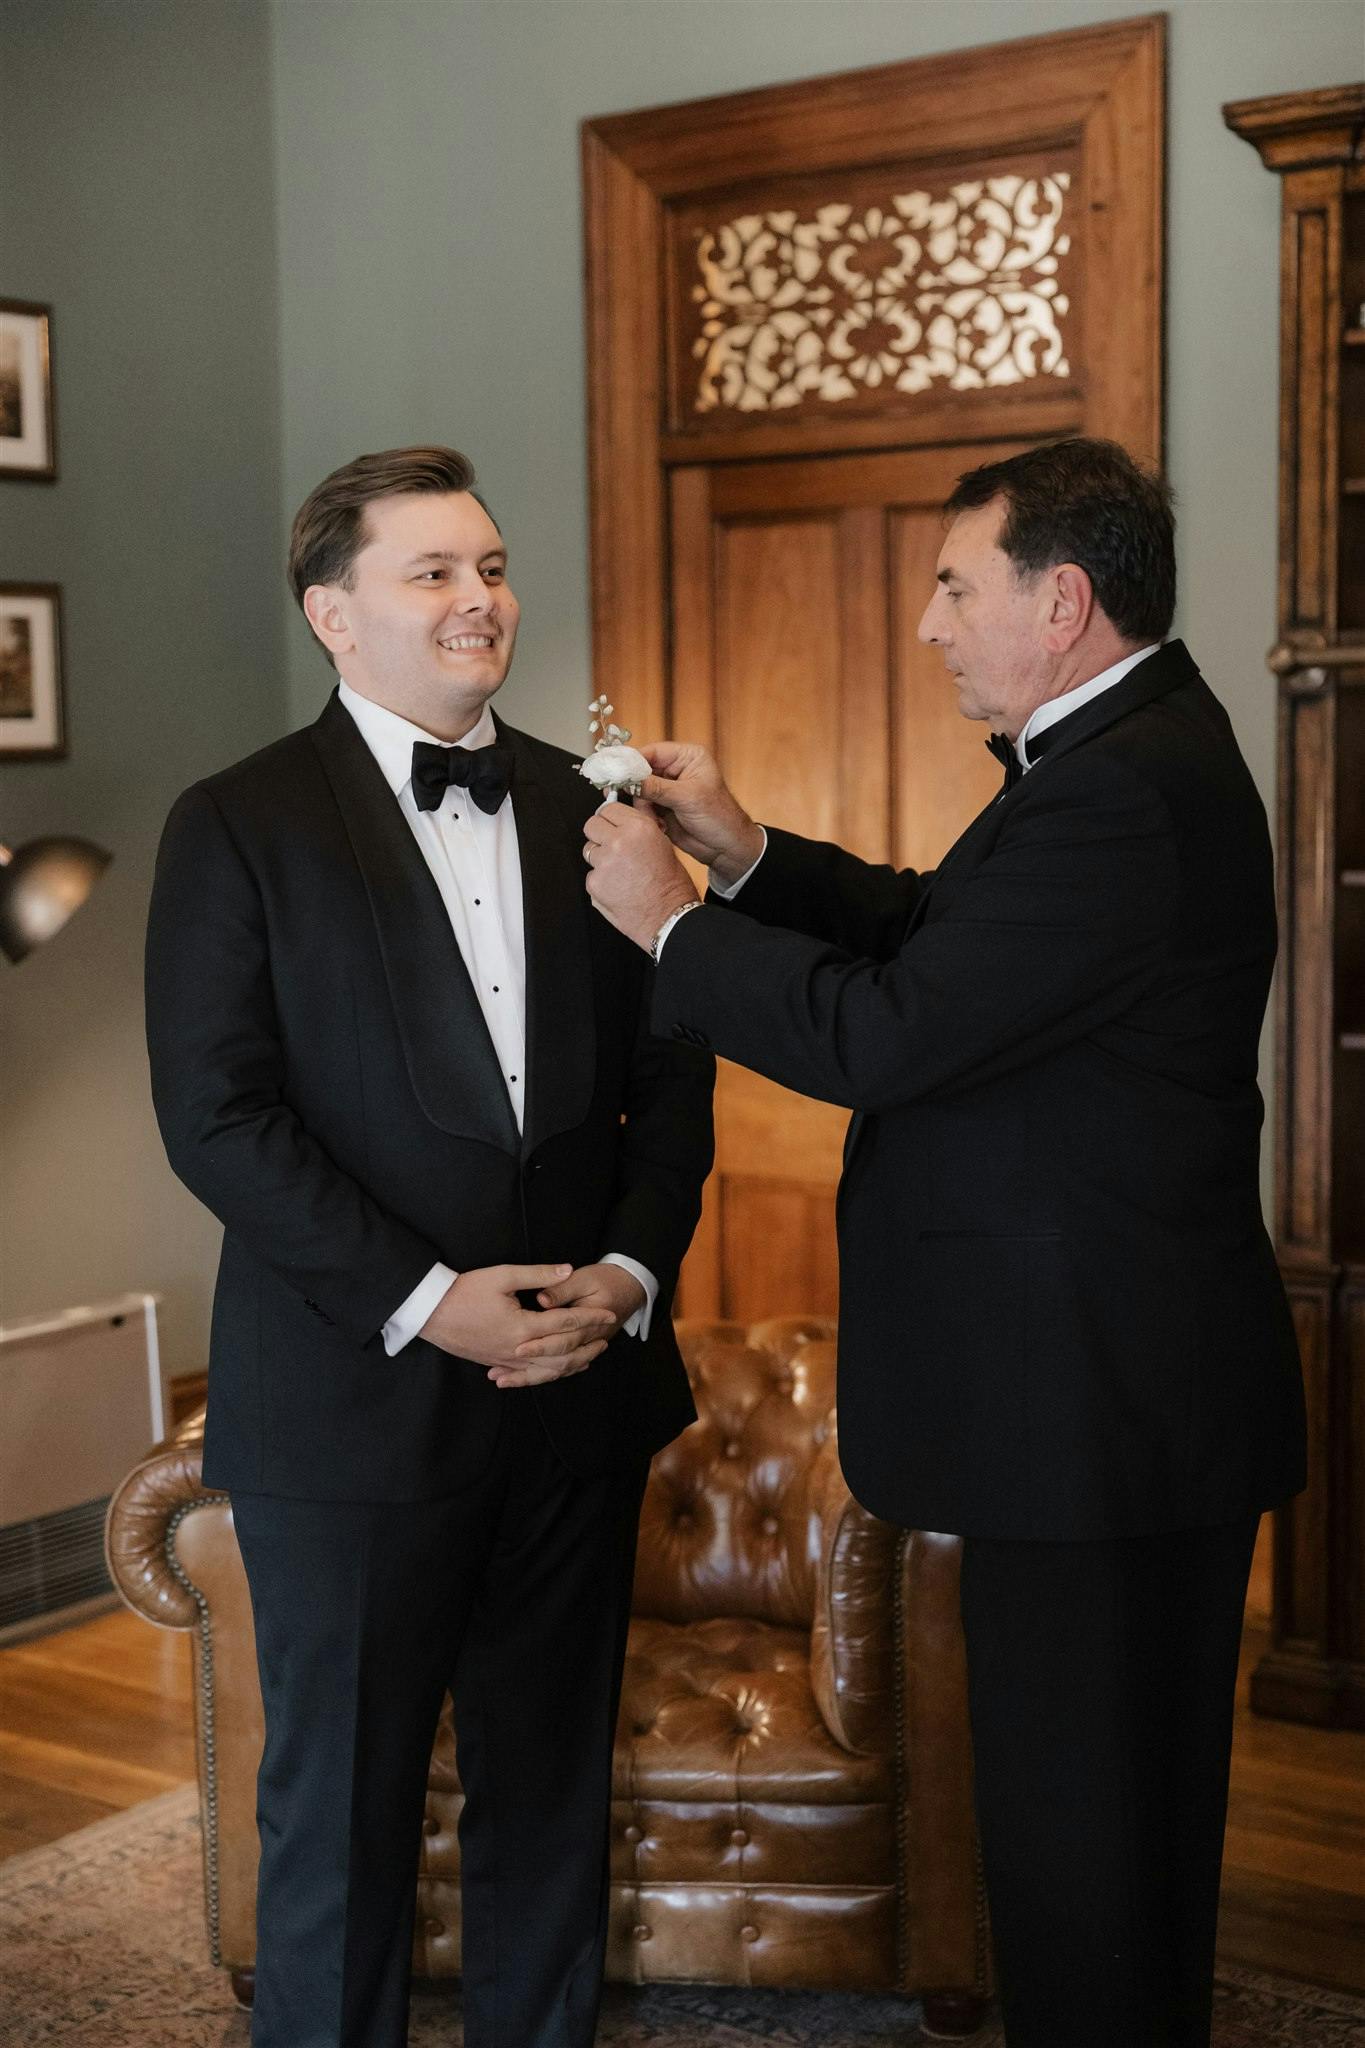 Father pinning boutonniere